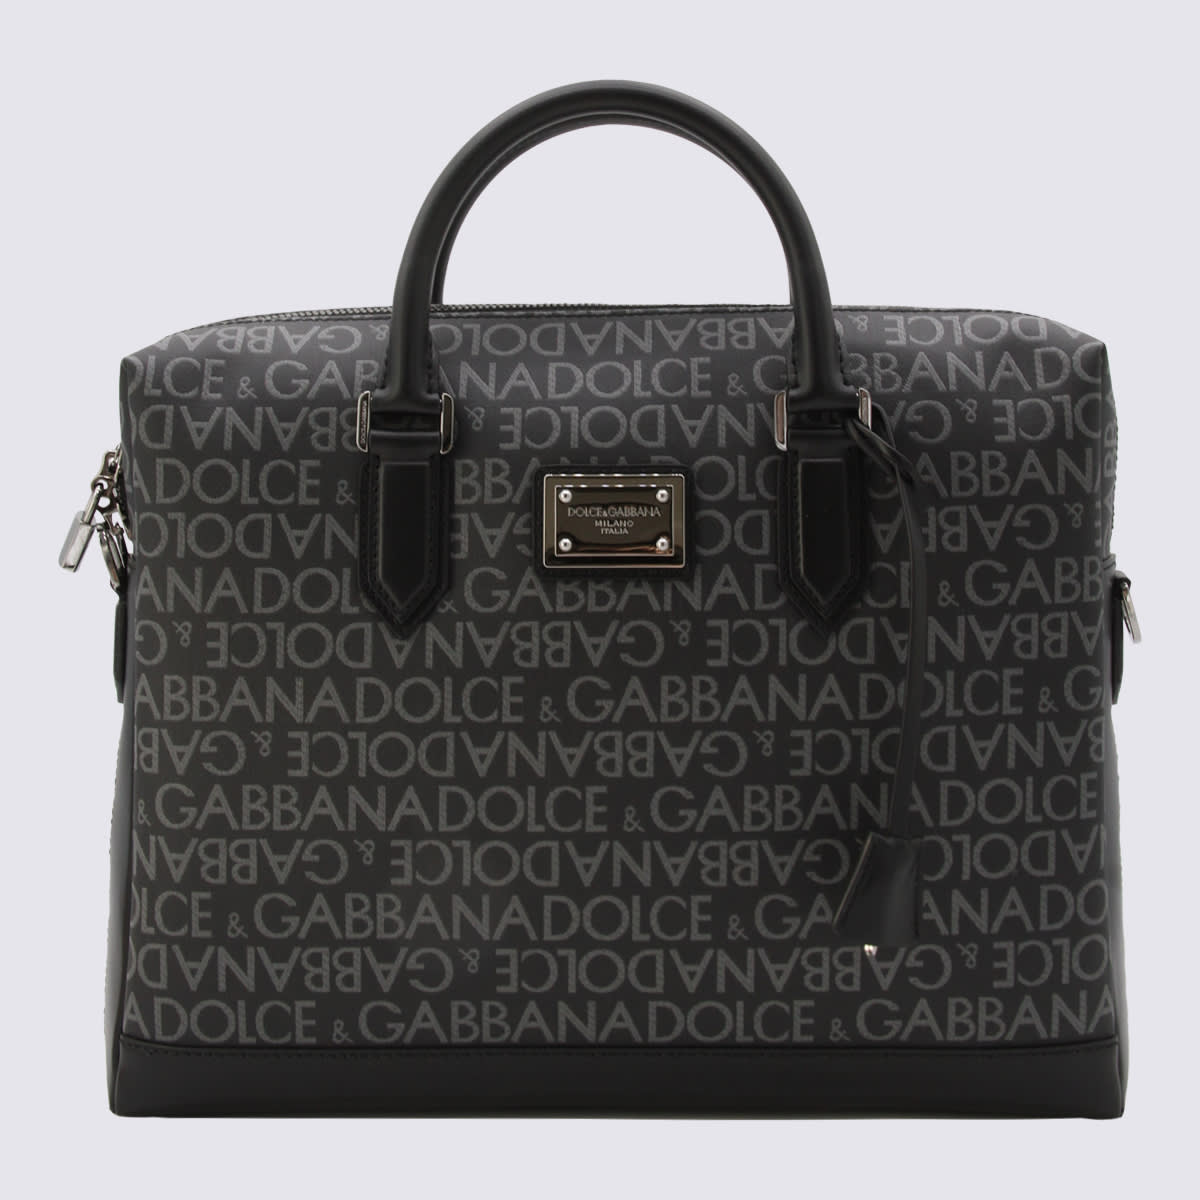 DOLCE & GABBANA BLACK AND GREY LEATHER HANDLE BAG